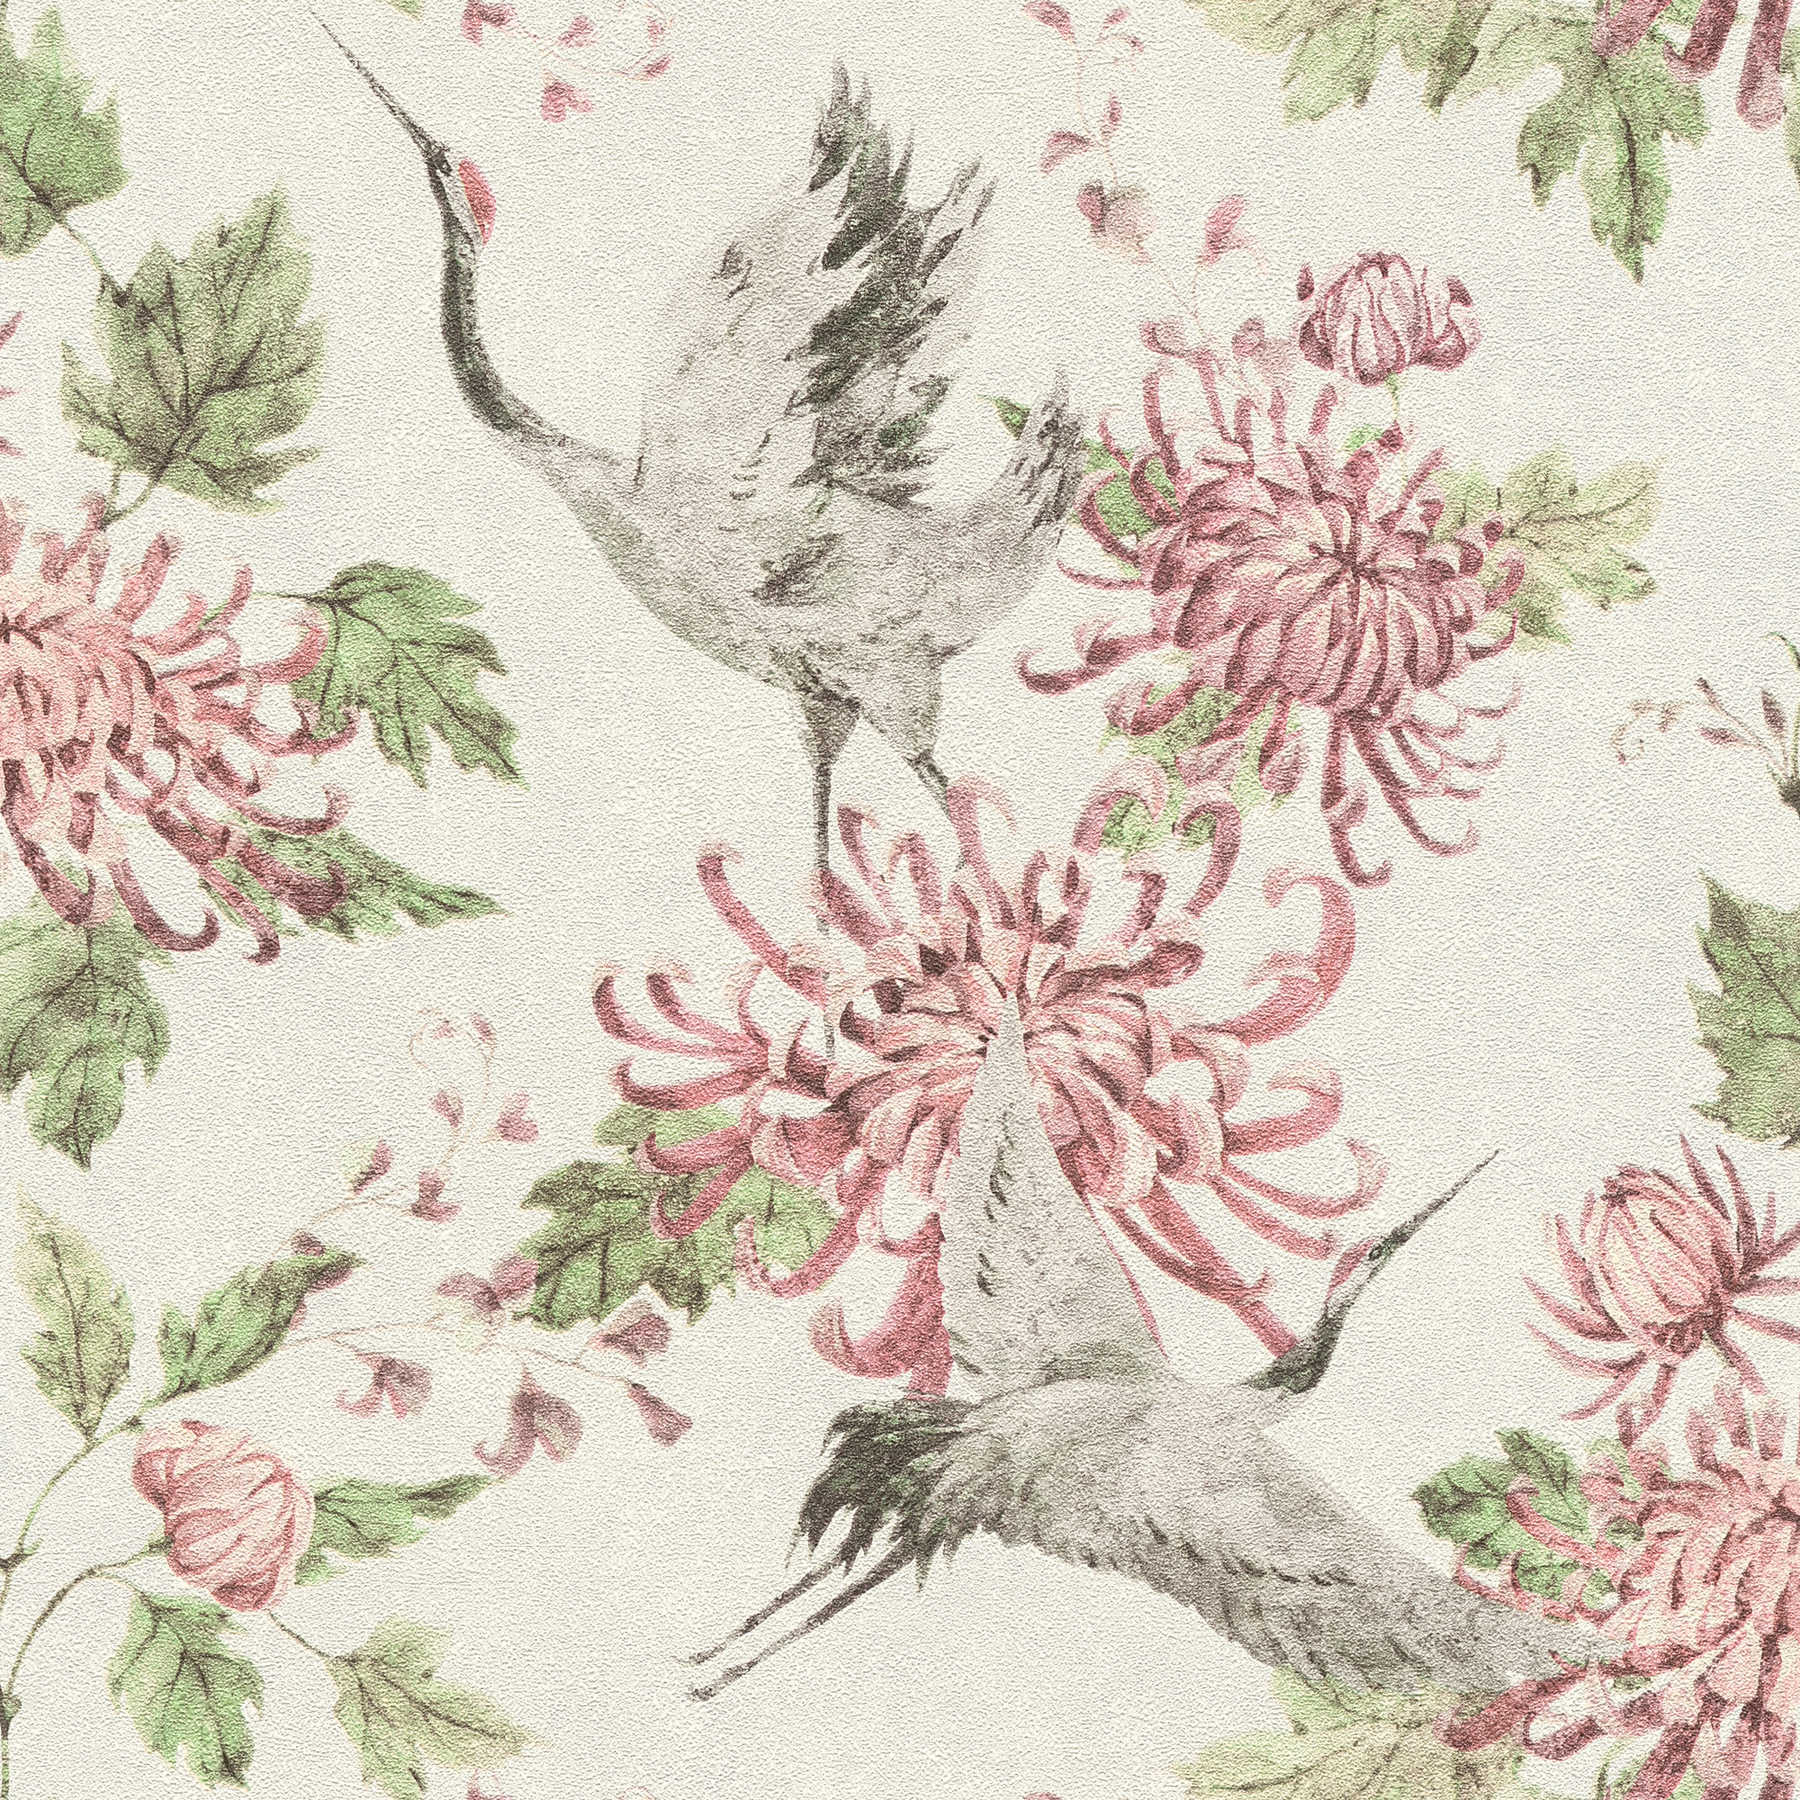         Pattern wallpaper with Asian crane and flower motif - pink, green, white
    